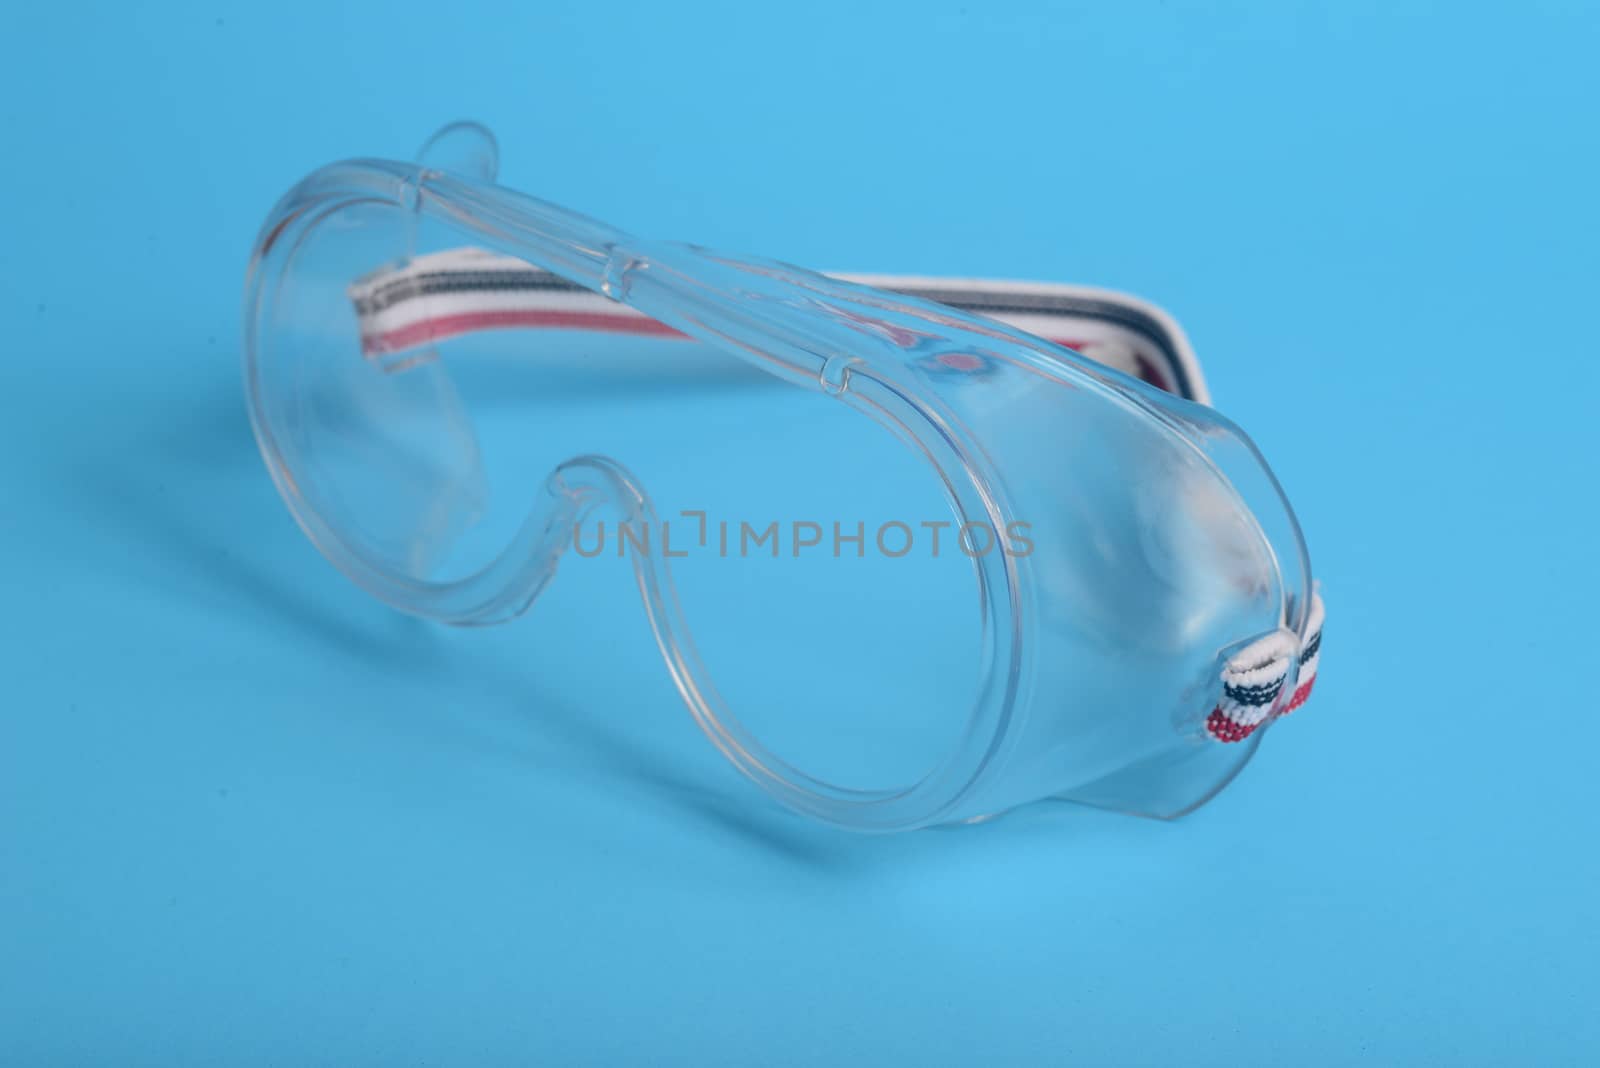 transparent plastic laboratory glasses on blue background by ideation90